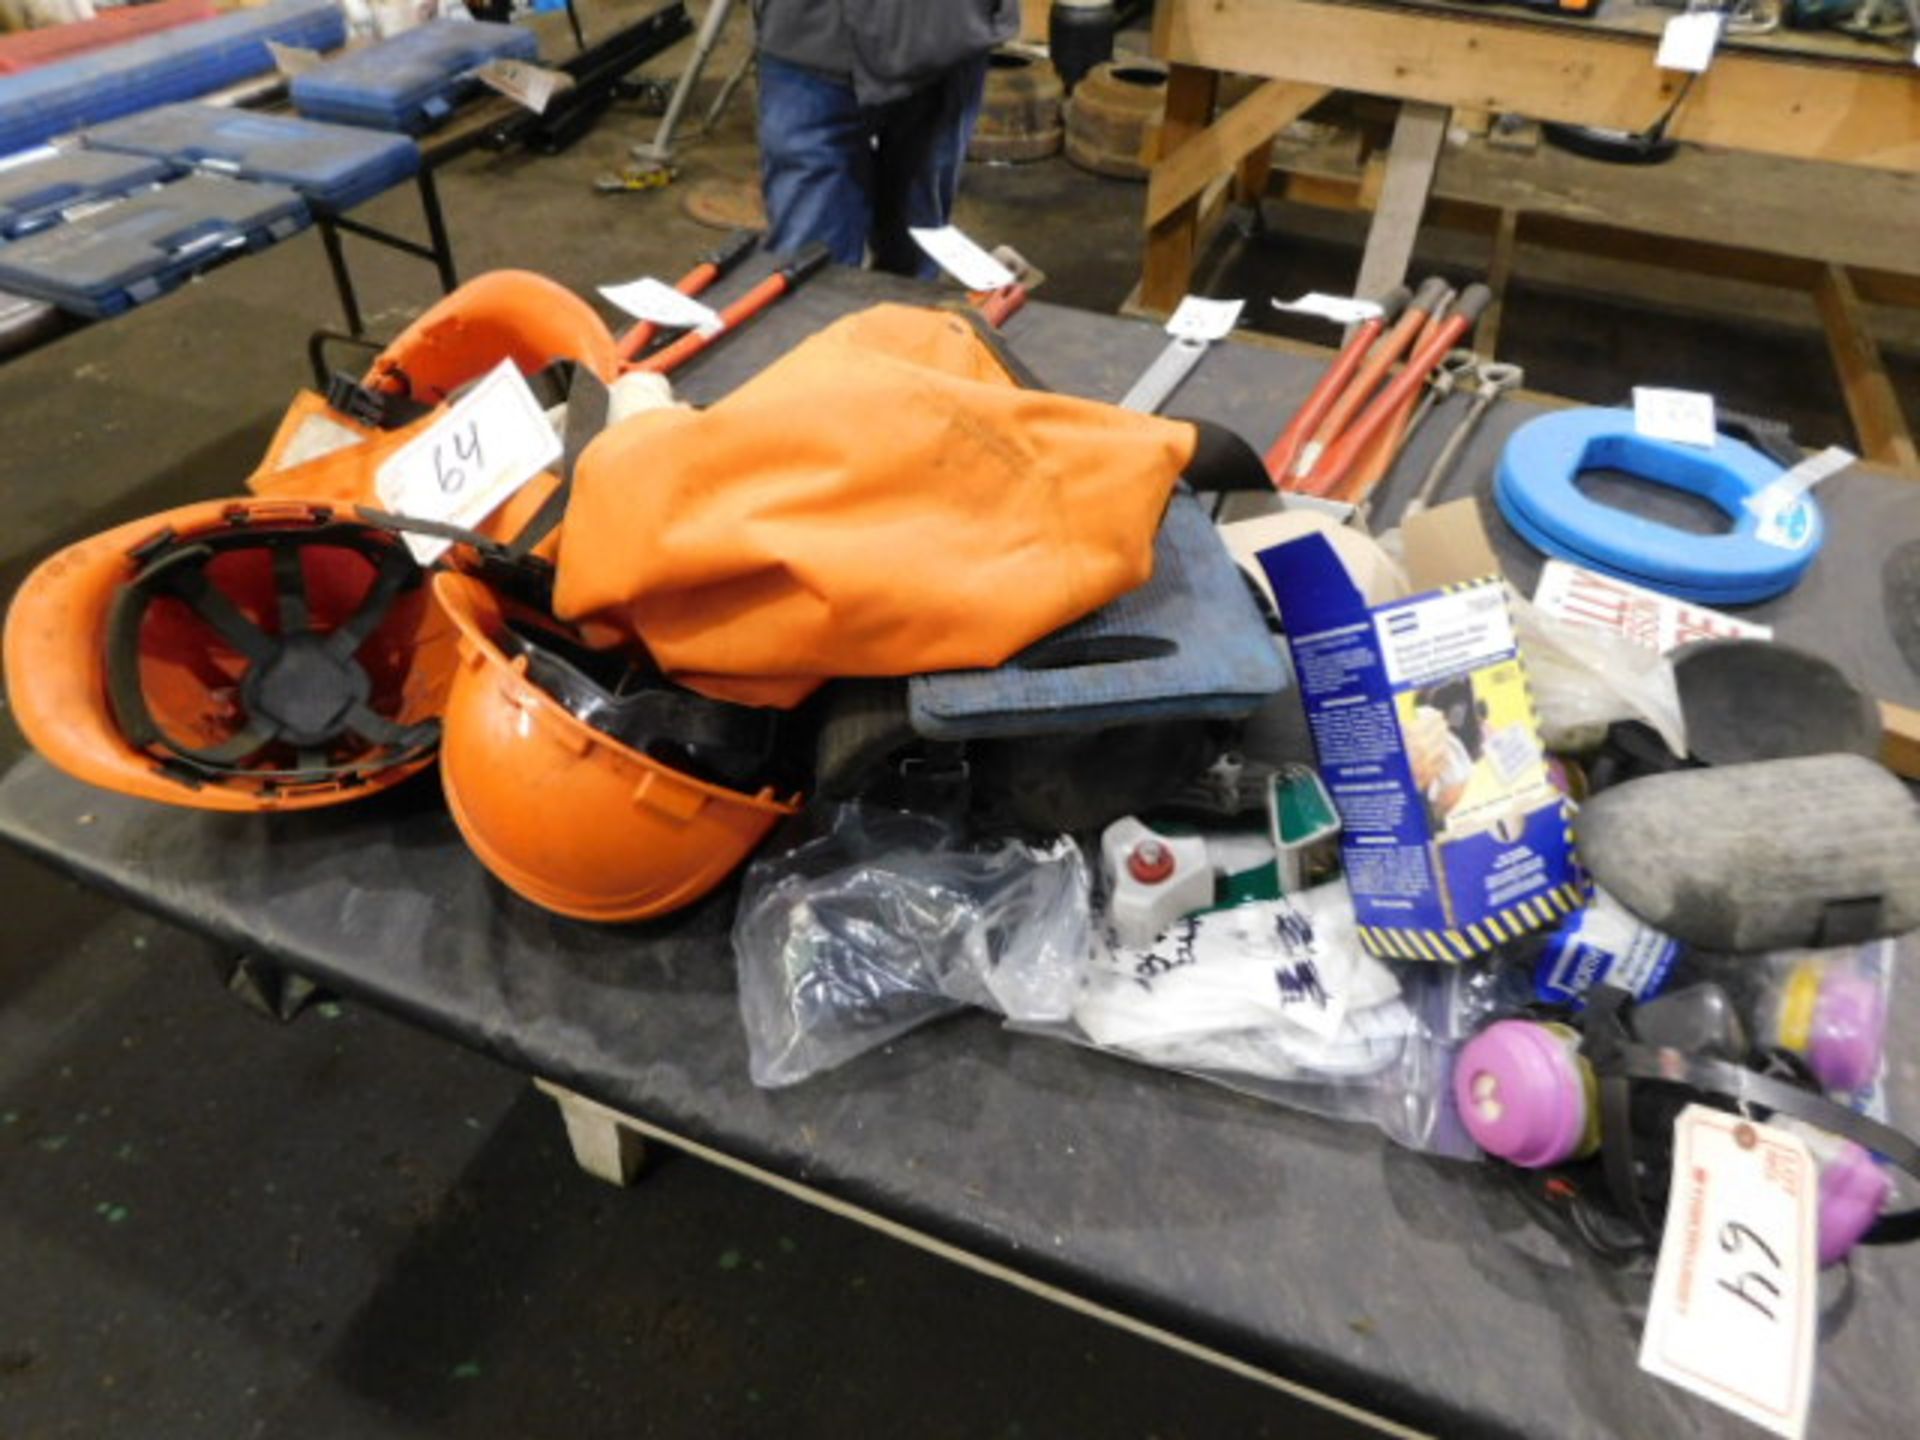 LOT OF SAFETY EQUIPMENT , HARD HATS, AIR FILTERS, MASKS, ETC.